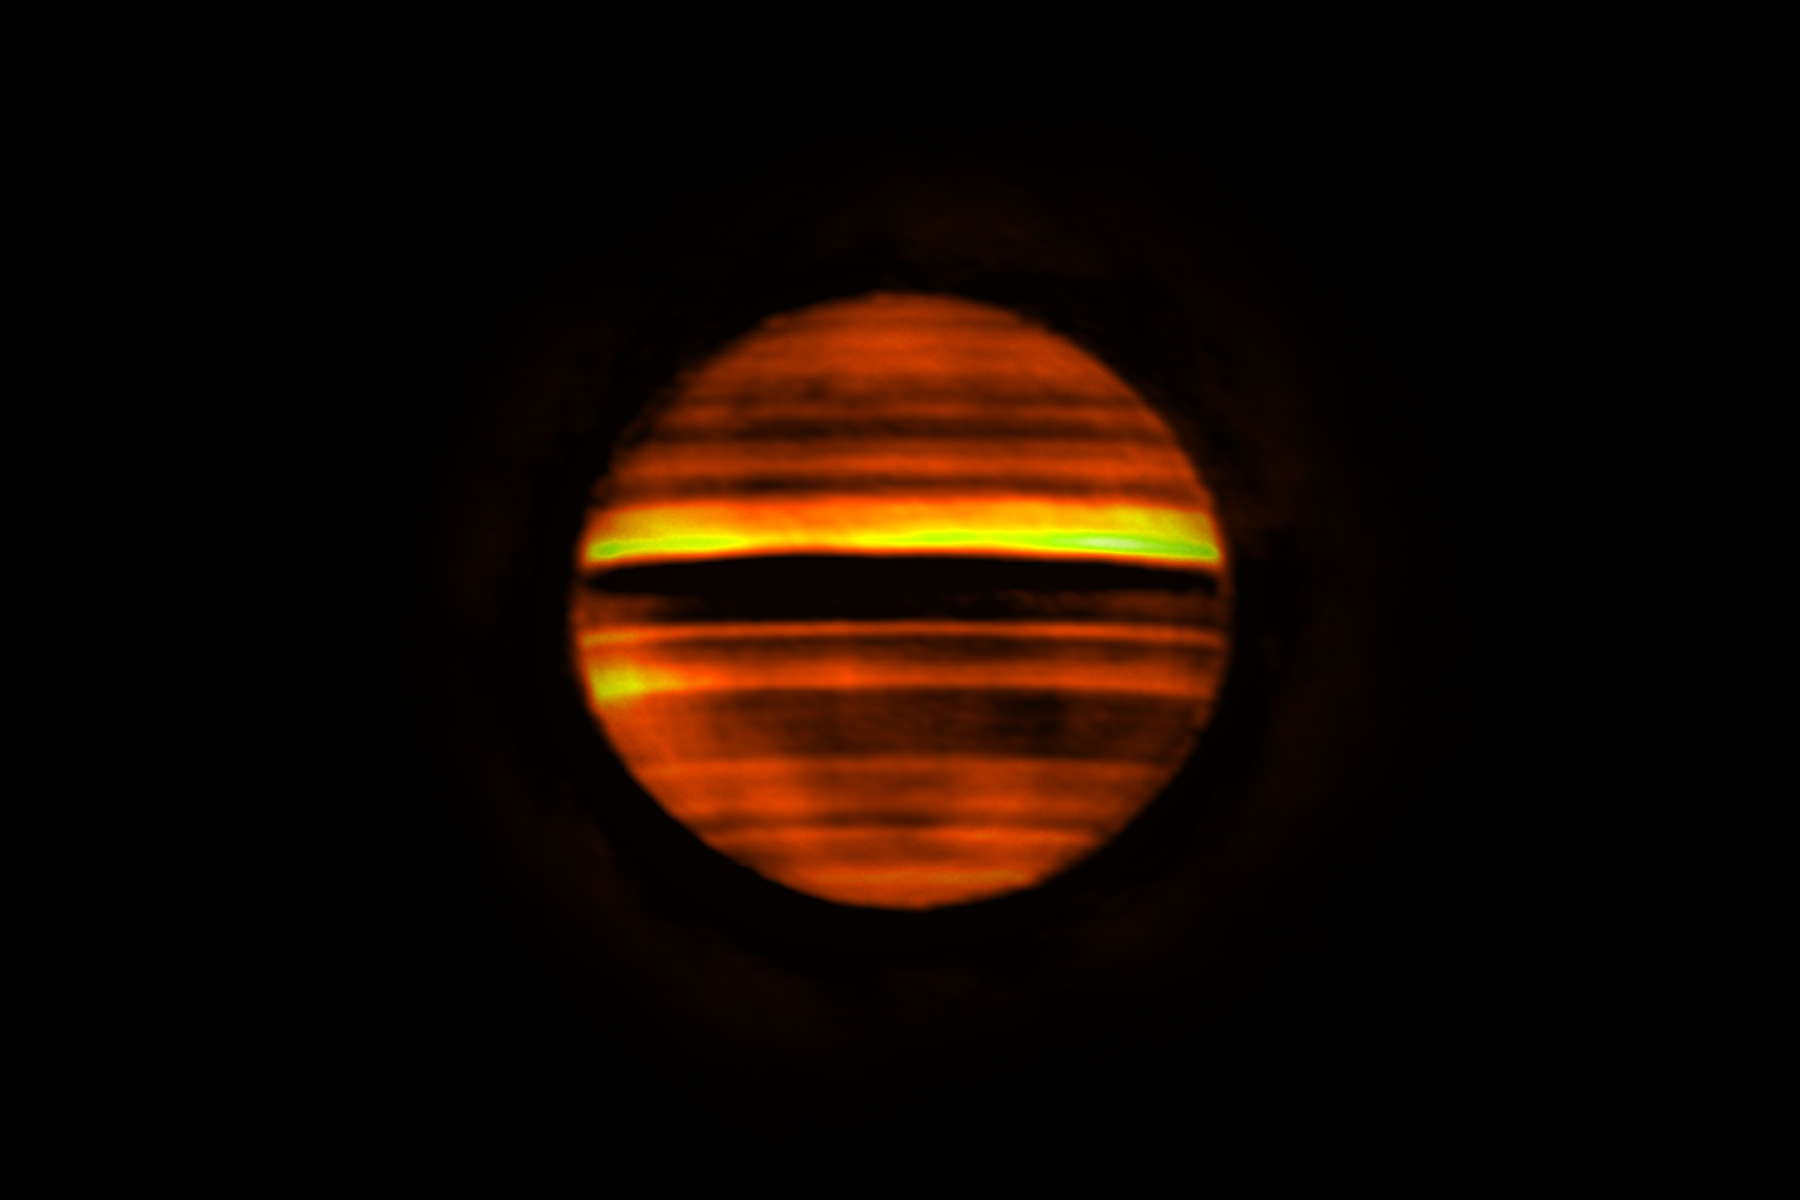 Radio image of Jupiter made with ALMA. Bright bands indicate high temperatures and dark bands low temperatures. The dark bands correspond to the zones on Jupiter, which are often white at visible wavelengths. The bright bands correspond to the brown belts on the planet. This image contains over 10 hours of data, so fine details are smeared by the planet's rotation. Credit: ALMA (ESO/NAOJ/NRAO), I. de Pater et al.; NRAO/AUI NSF, S. Dagnello